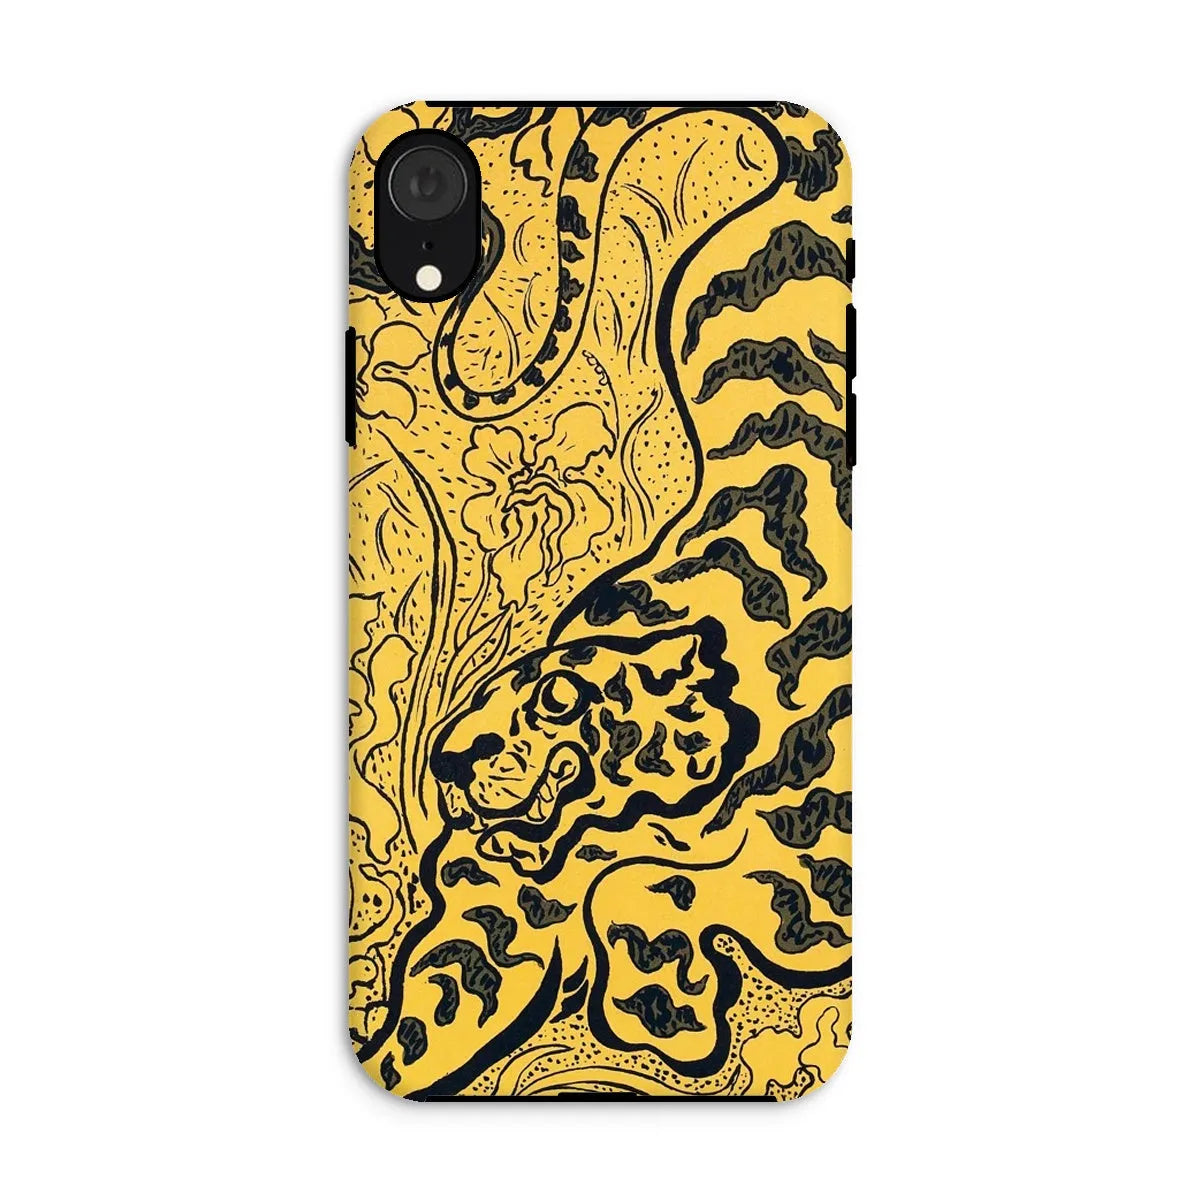 Tiger In The Jungle - Graphic Art Phone Case - Paul Ranson - Iphone Xr / Matte - Mobile Phone Cases - Aesthetic Art